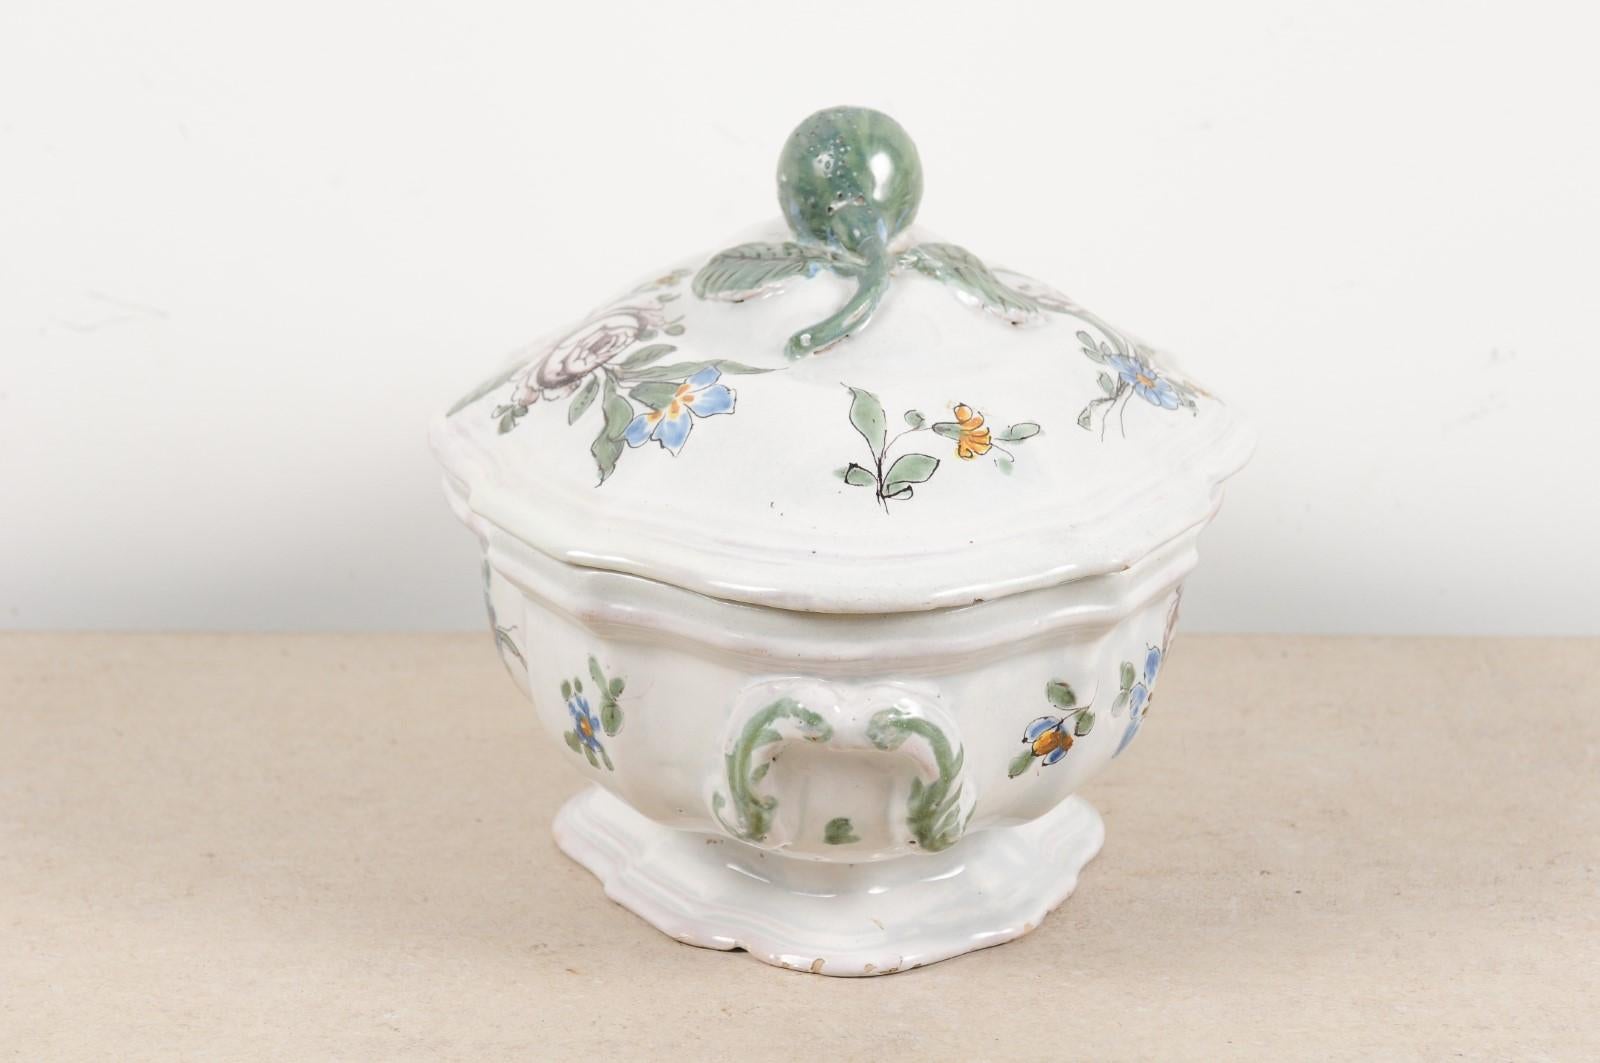 French 1750s Faience Oval Shaped Soup Tureen from Bordeaux with Floral Decor 3